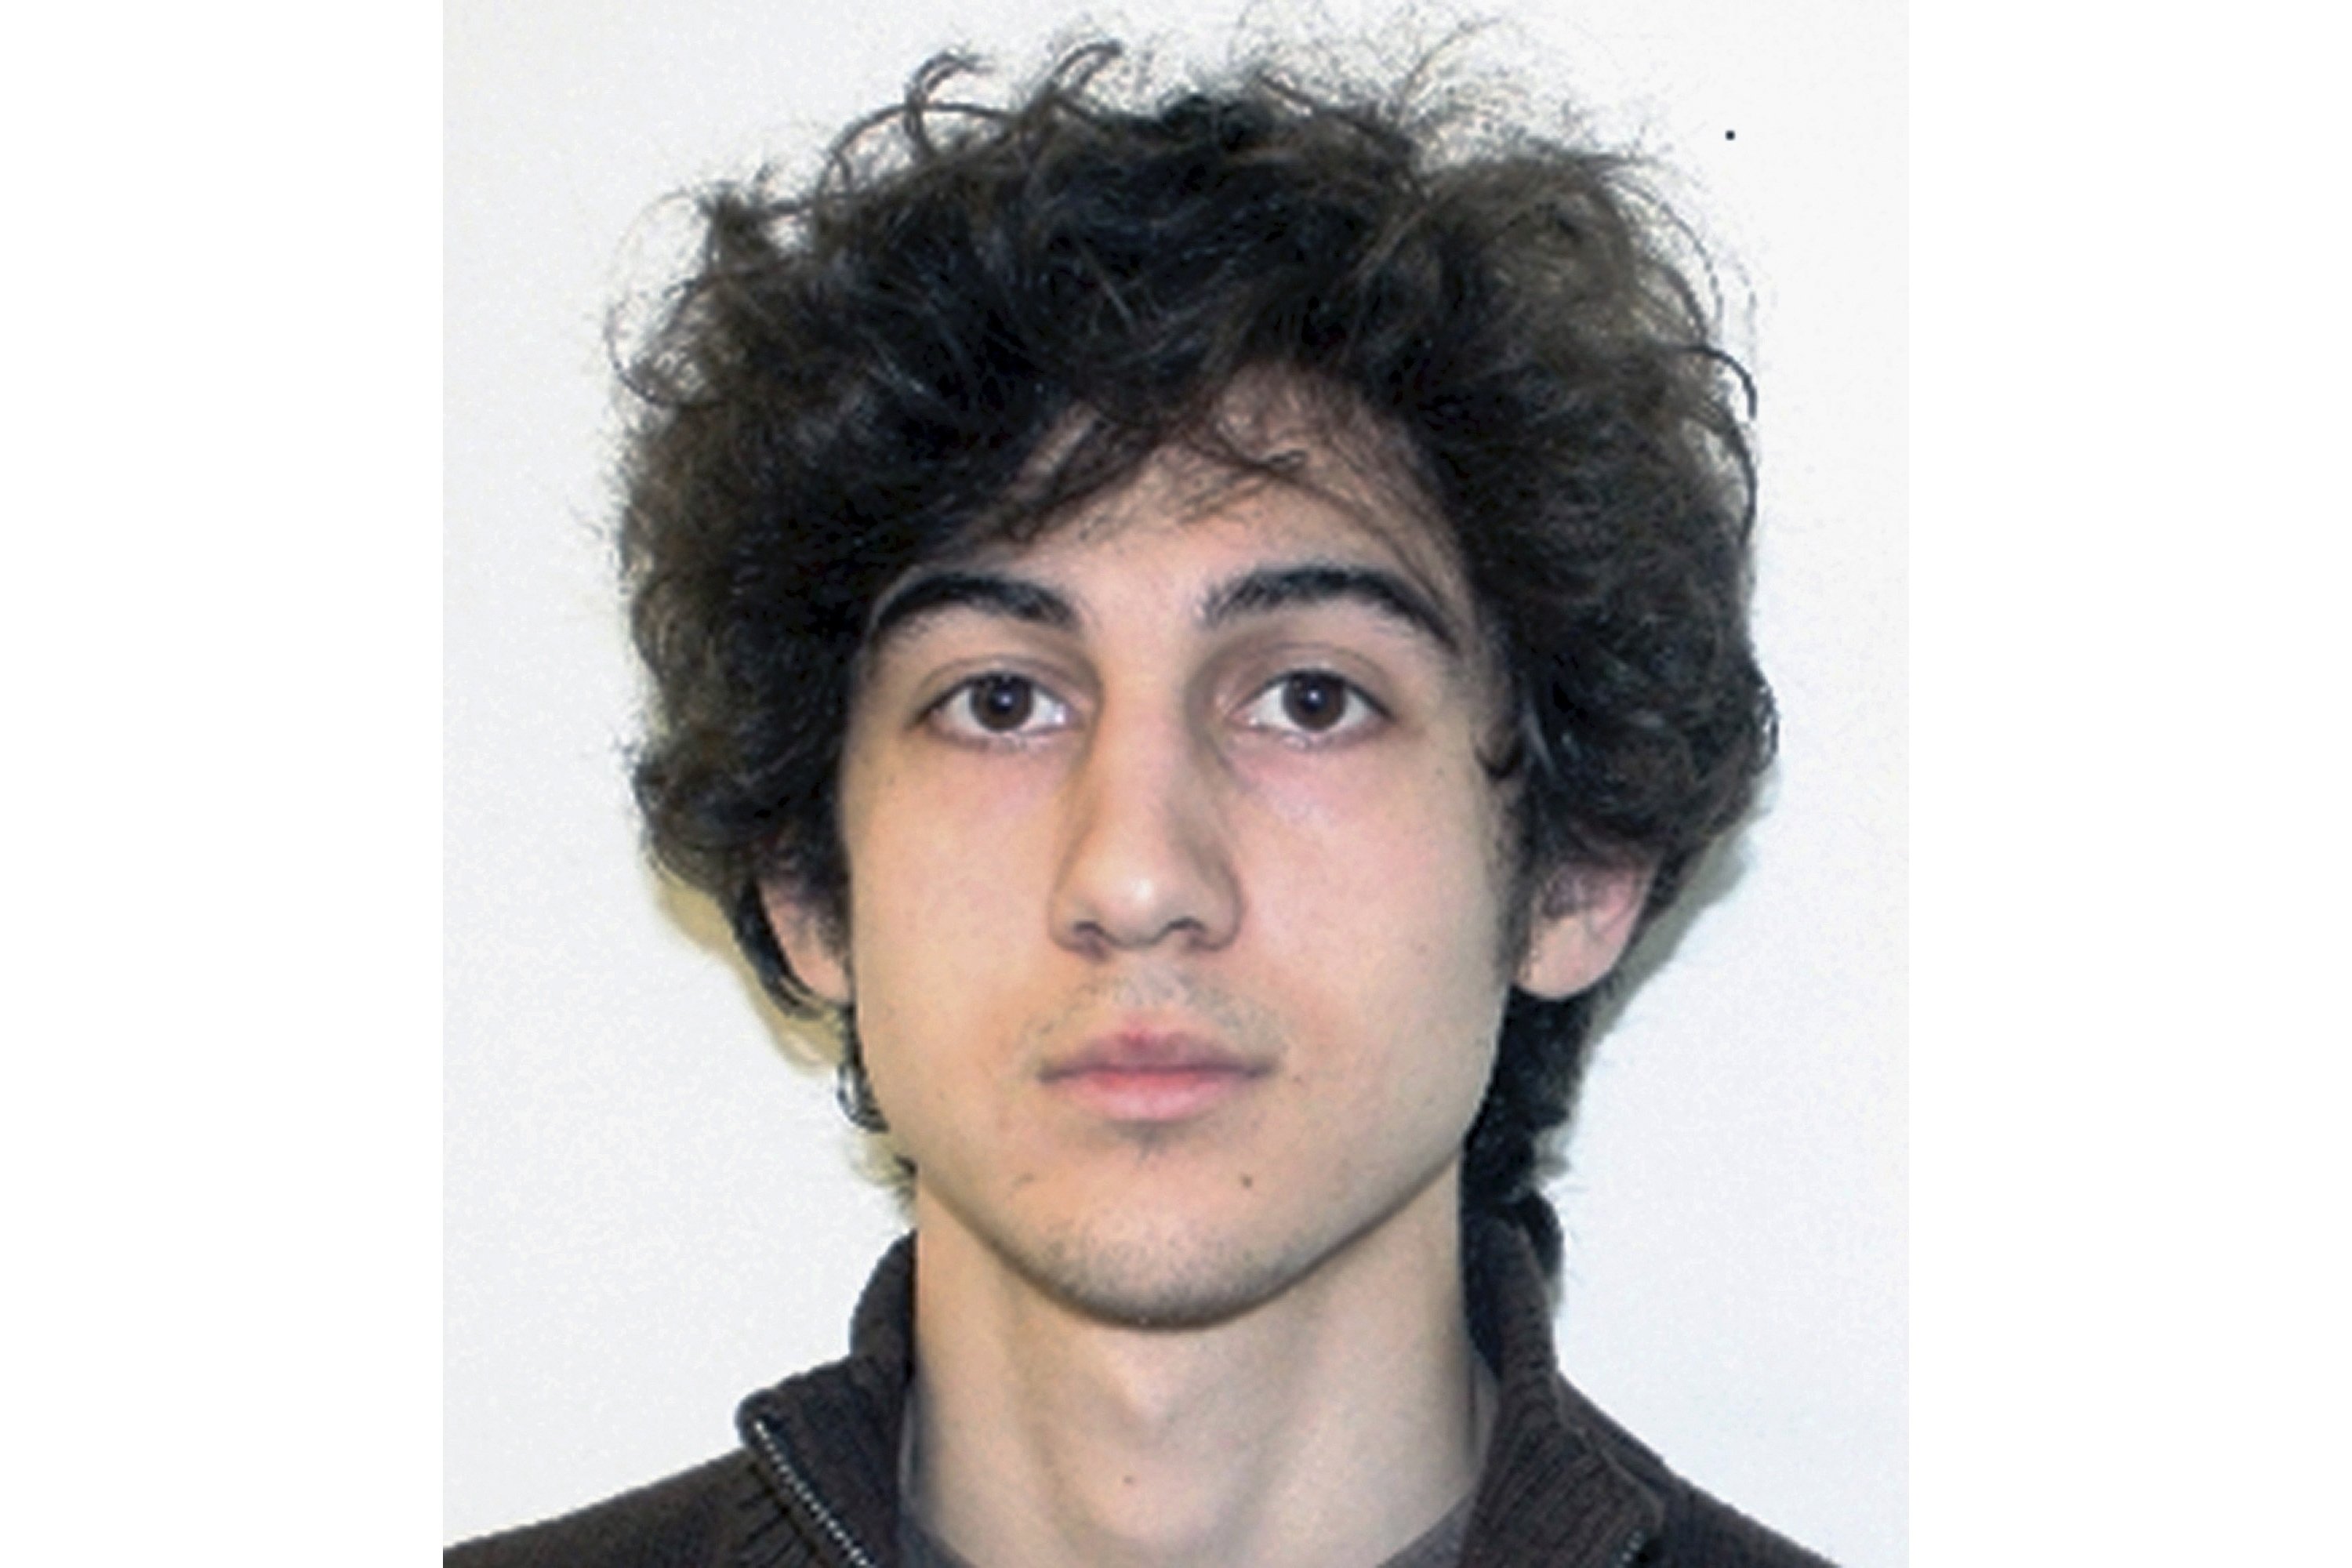 The court could re-impose the death sentence on the Boston Marathon bomber